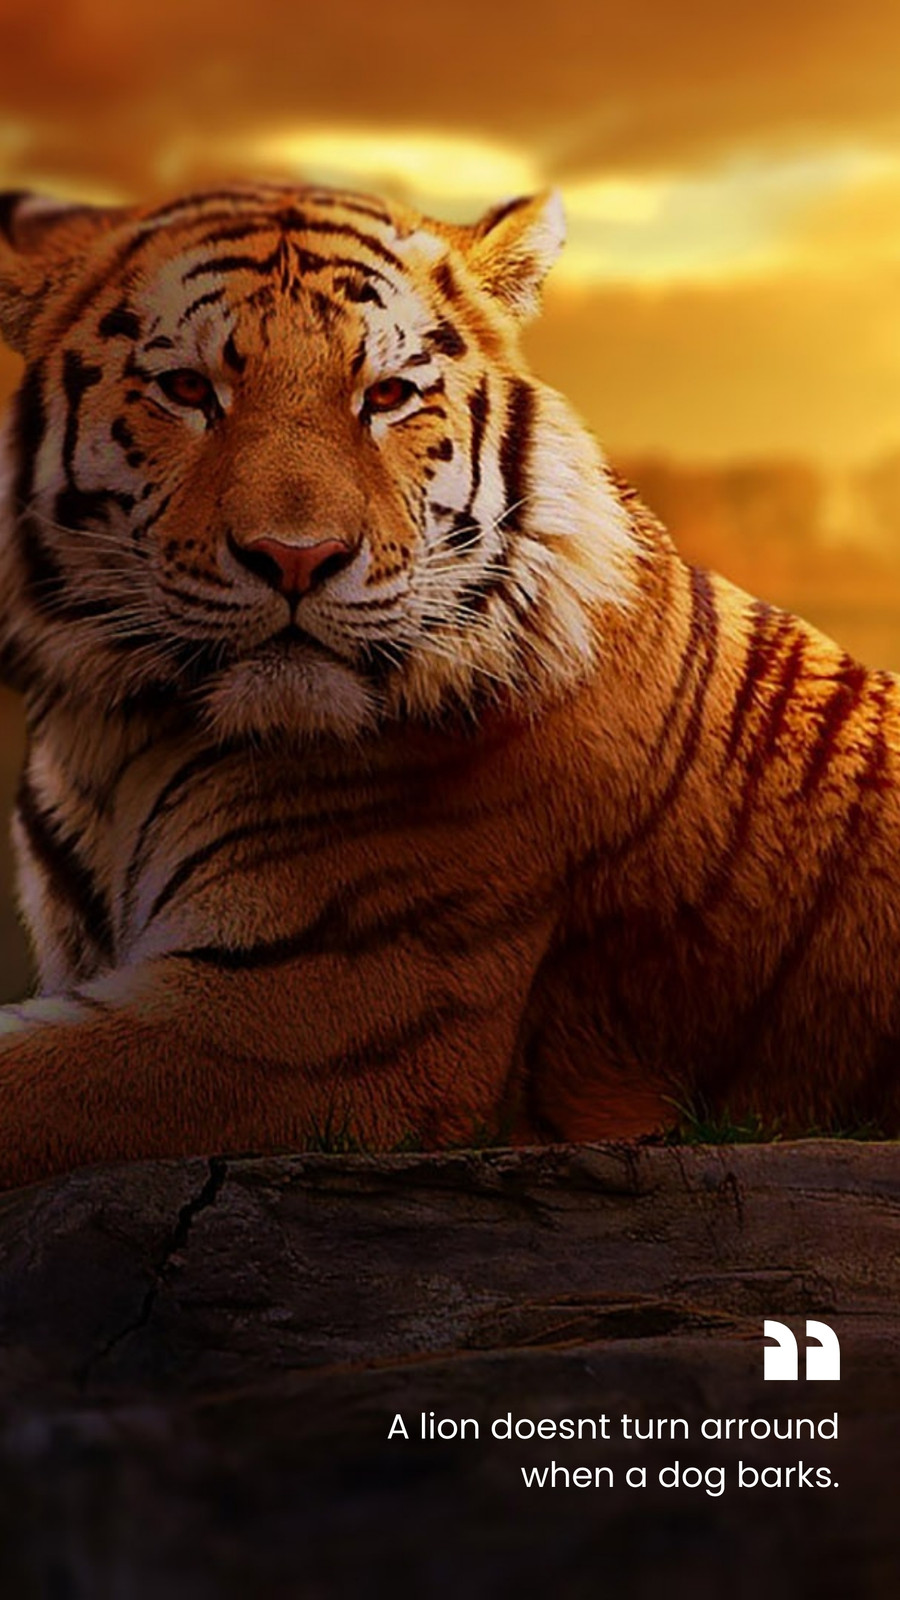 Premium AI Image  Tiger face wallpapers for iphone and android. browse and  enjoy our collection of wallpapers. tiger face wallpaper, tiger face  wallpaper, tiger wallpaper, tiger wallpaper